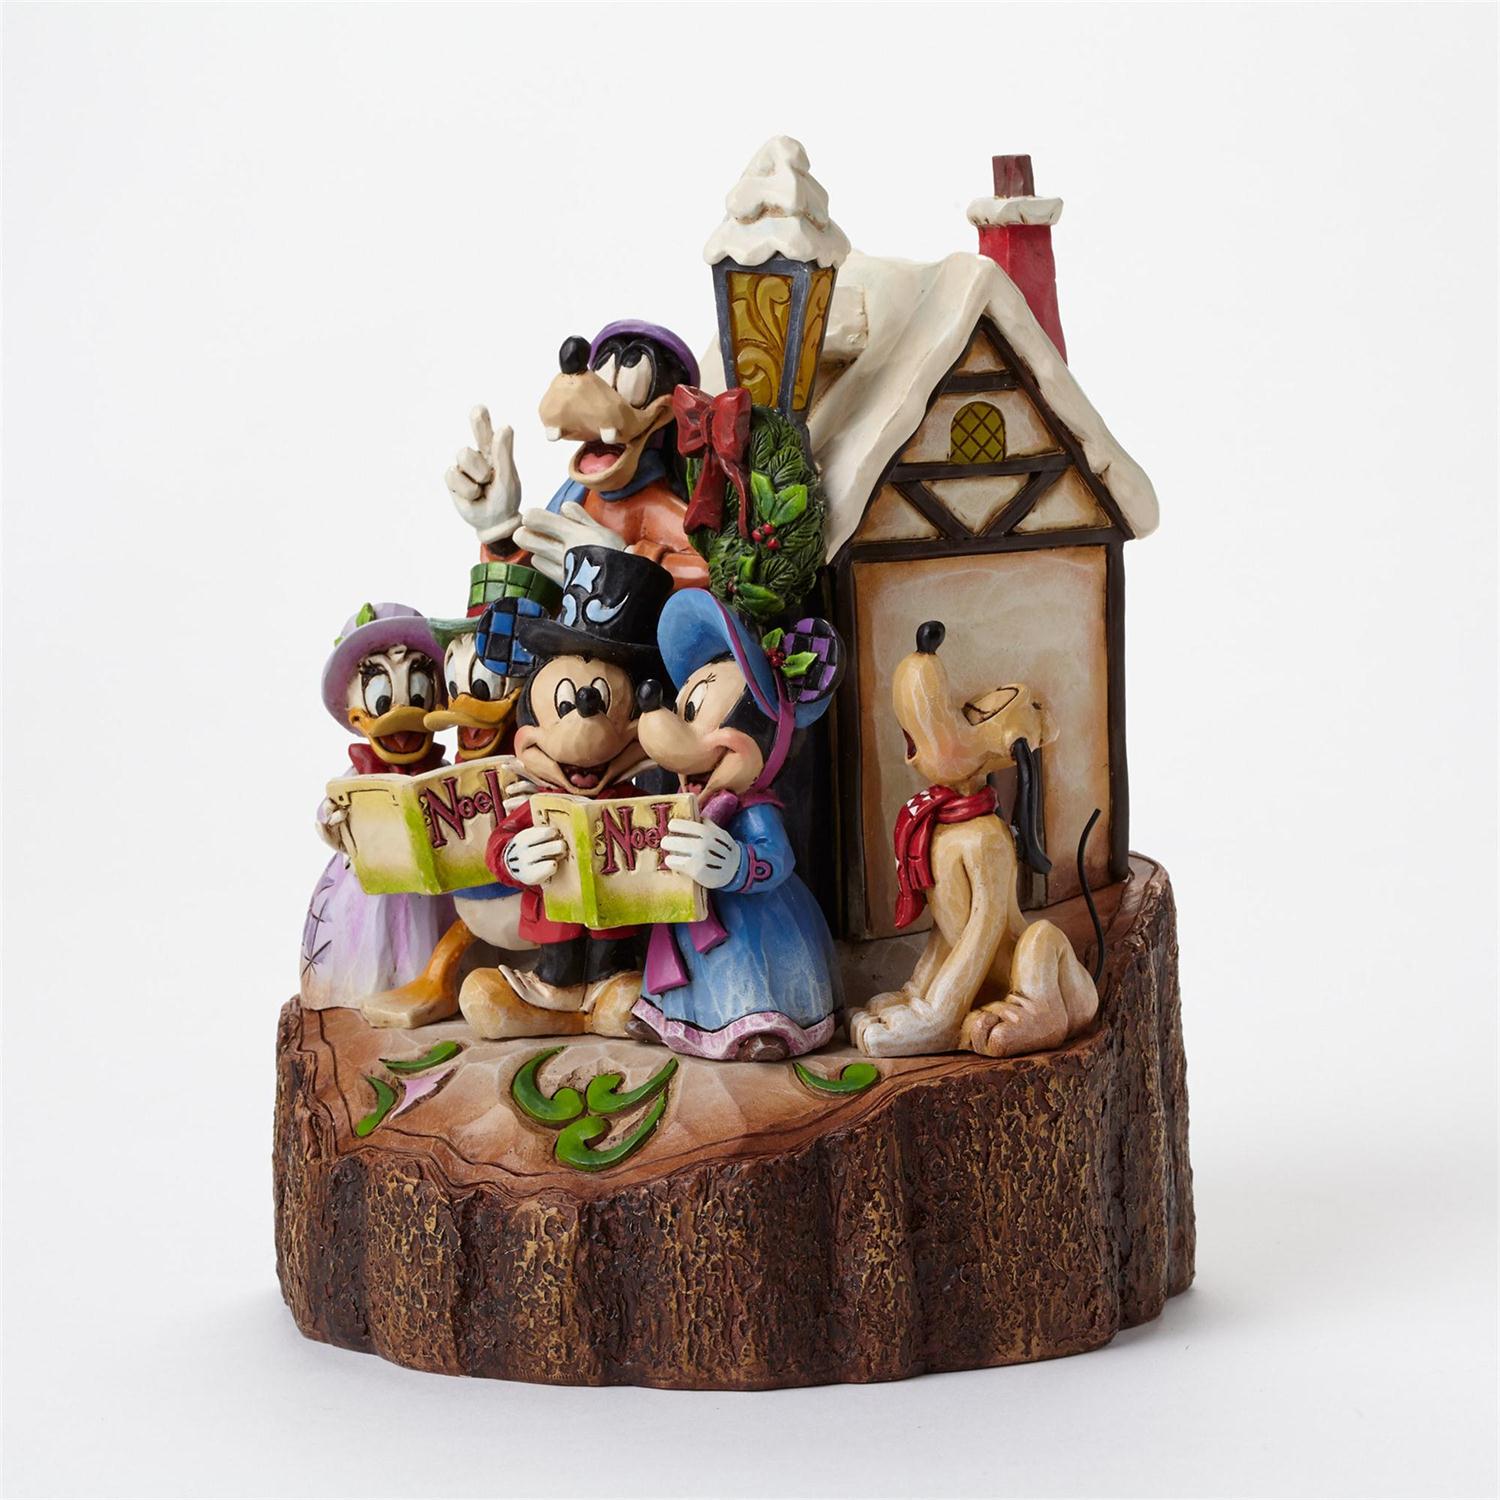 Caroling Carved by Heart Disney Traditions Statue by Enesco -Enesco - India - www.superherotoystore.com